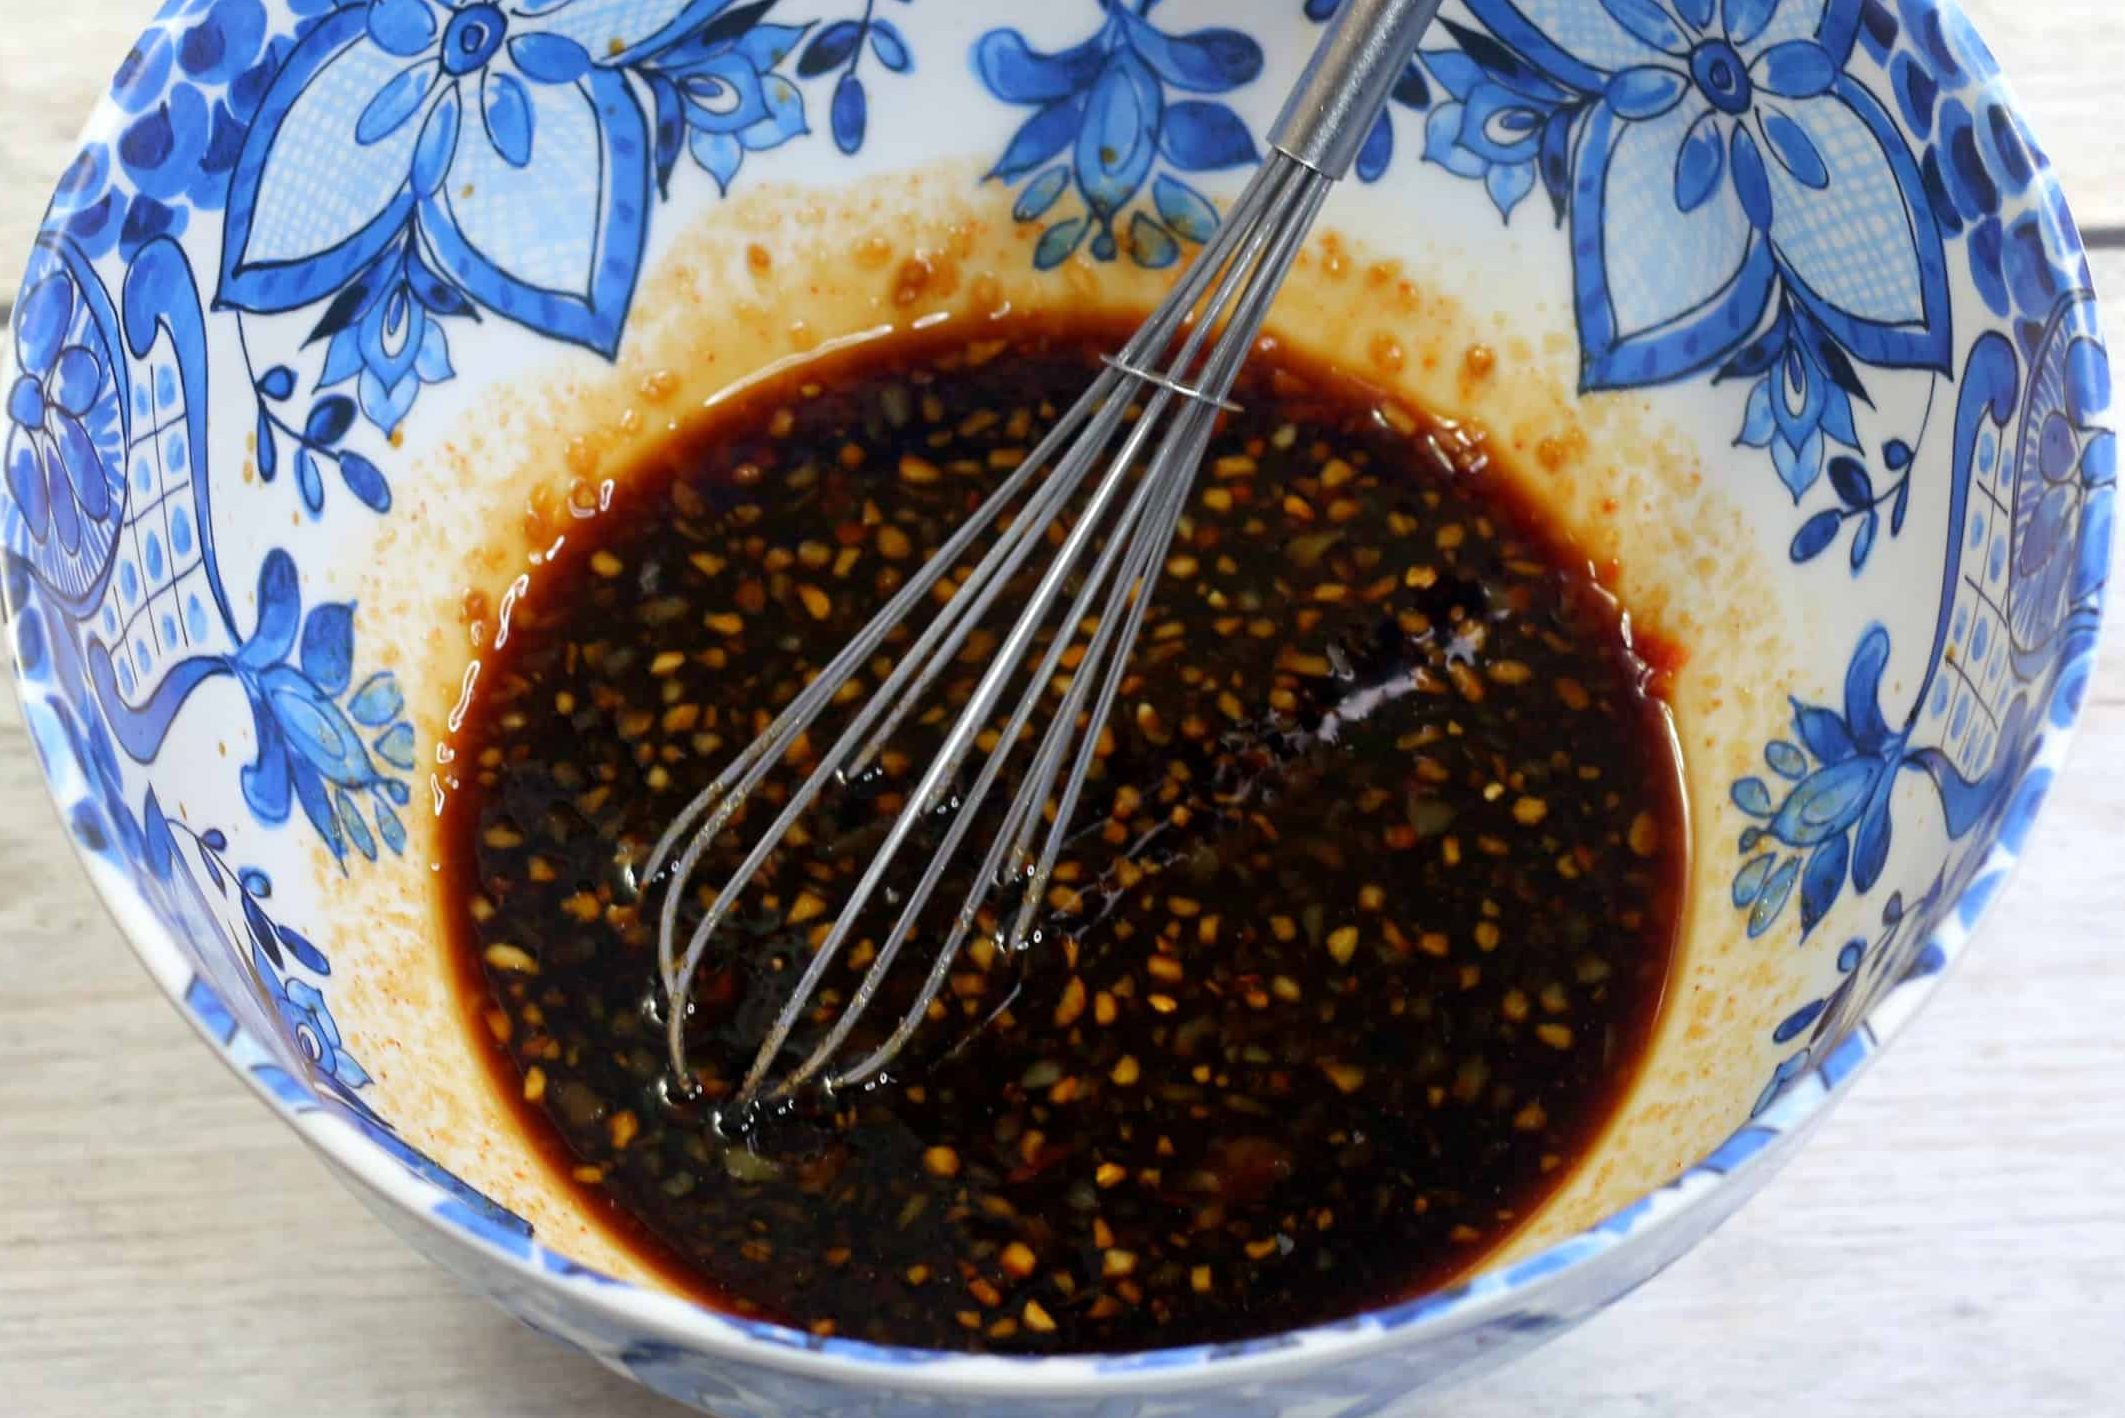 Prepare the marinade by whisking the brown sugar, ground ginger, garlic, soy sauce, and sambal paste in a bowl. 